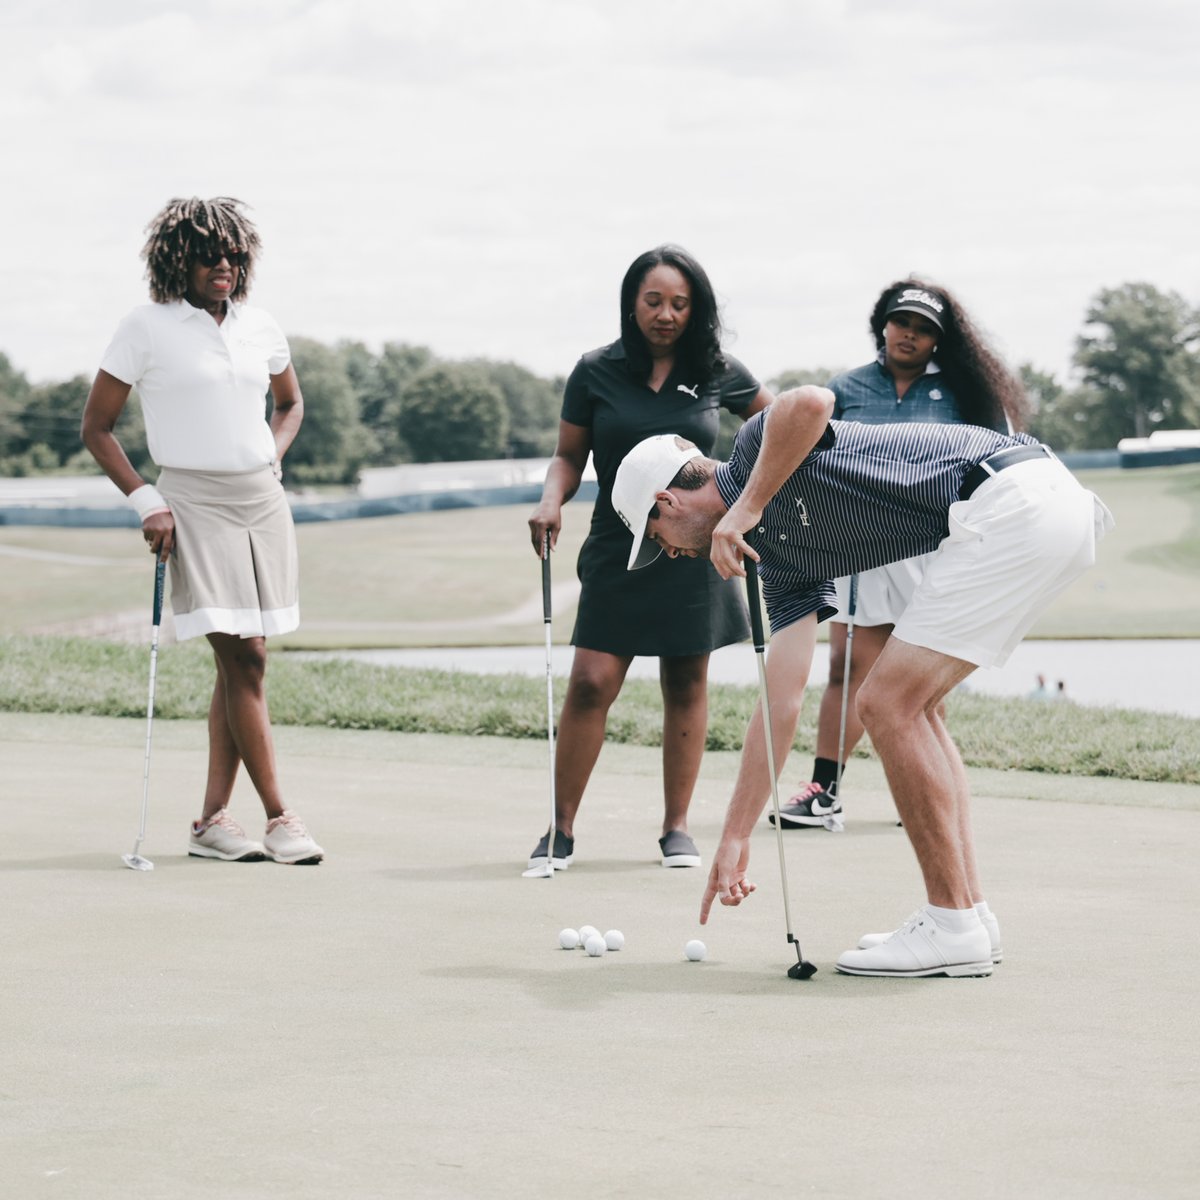 Putt for dough. Great having @BlackGirlsGolf at the #BMWCHAMPS today to participate in a putting clinic with PGA TOUR professional @asmalley_golf.